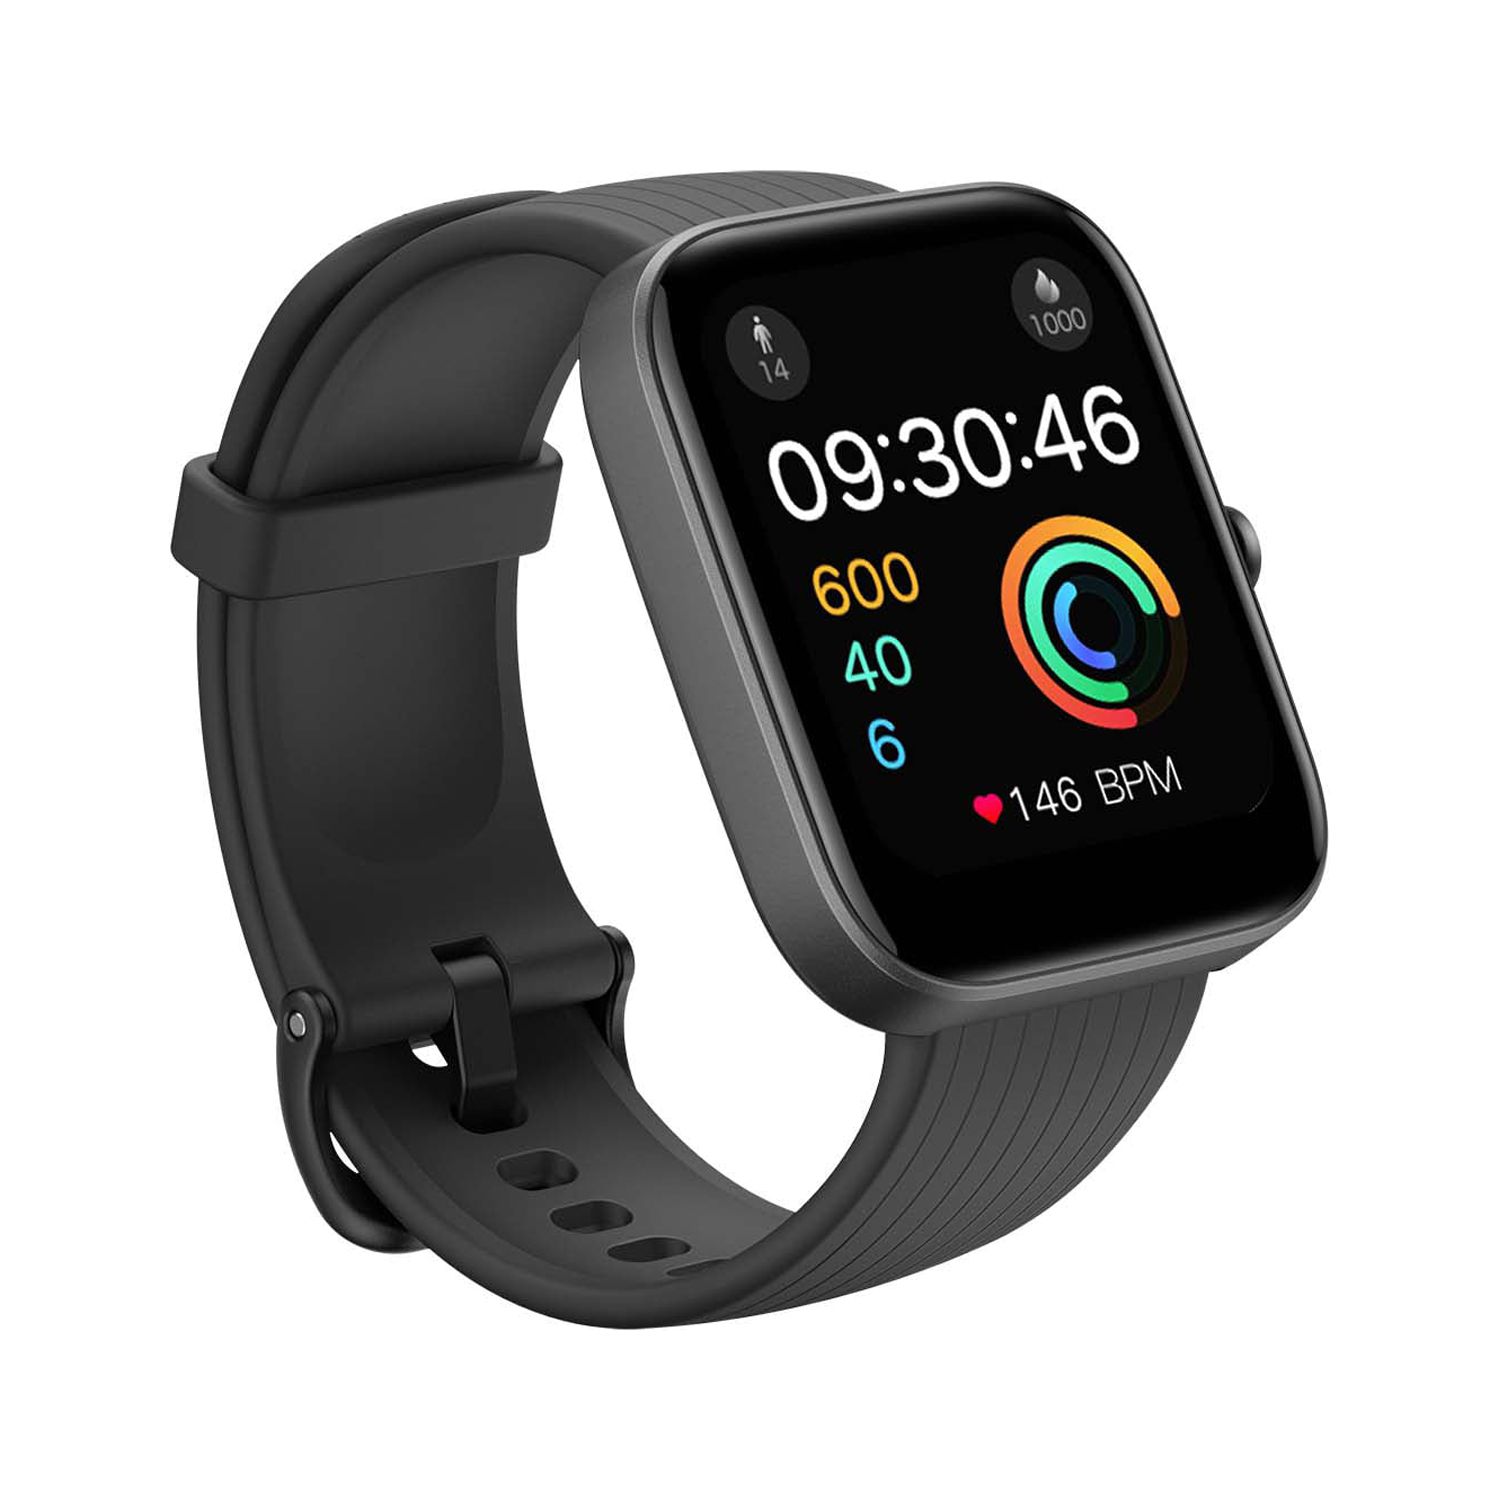 Amazfit Bip 3 Urban Edition Smart Watch: Health & Fitness Tracker - Black Silicon watchband - image 3 of 13